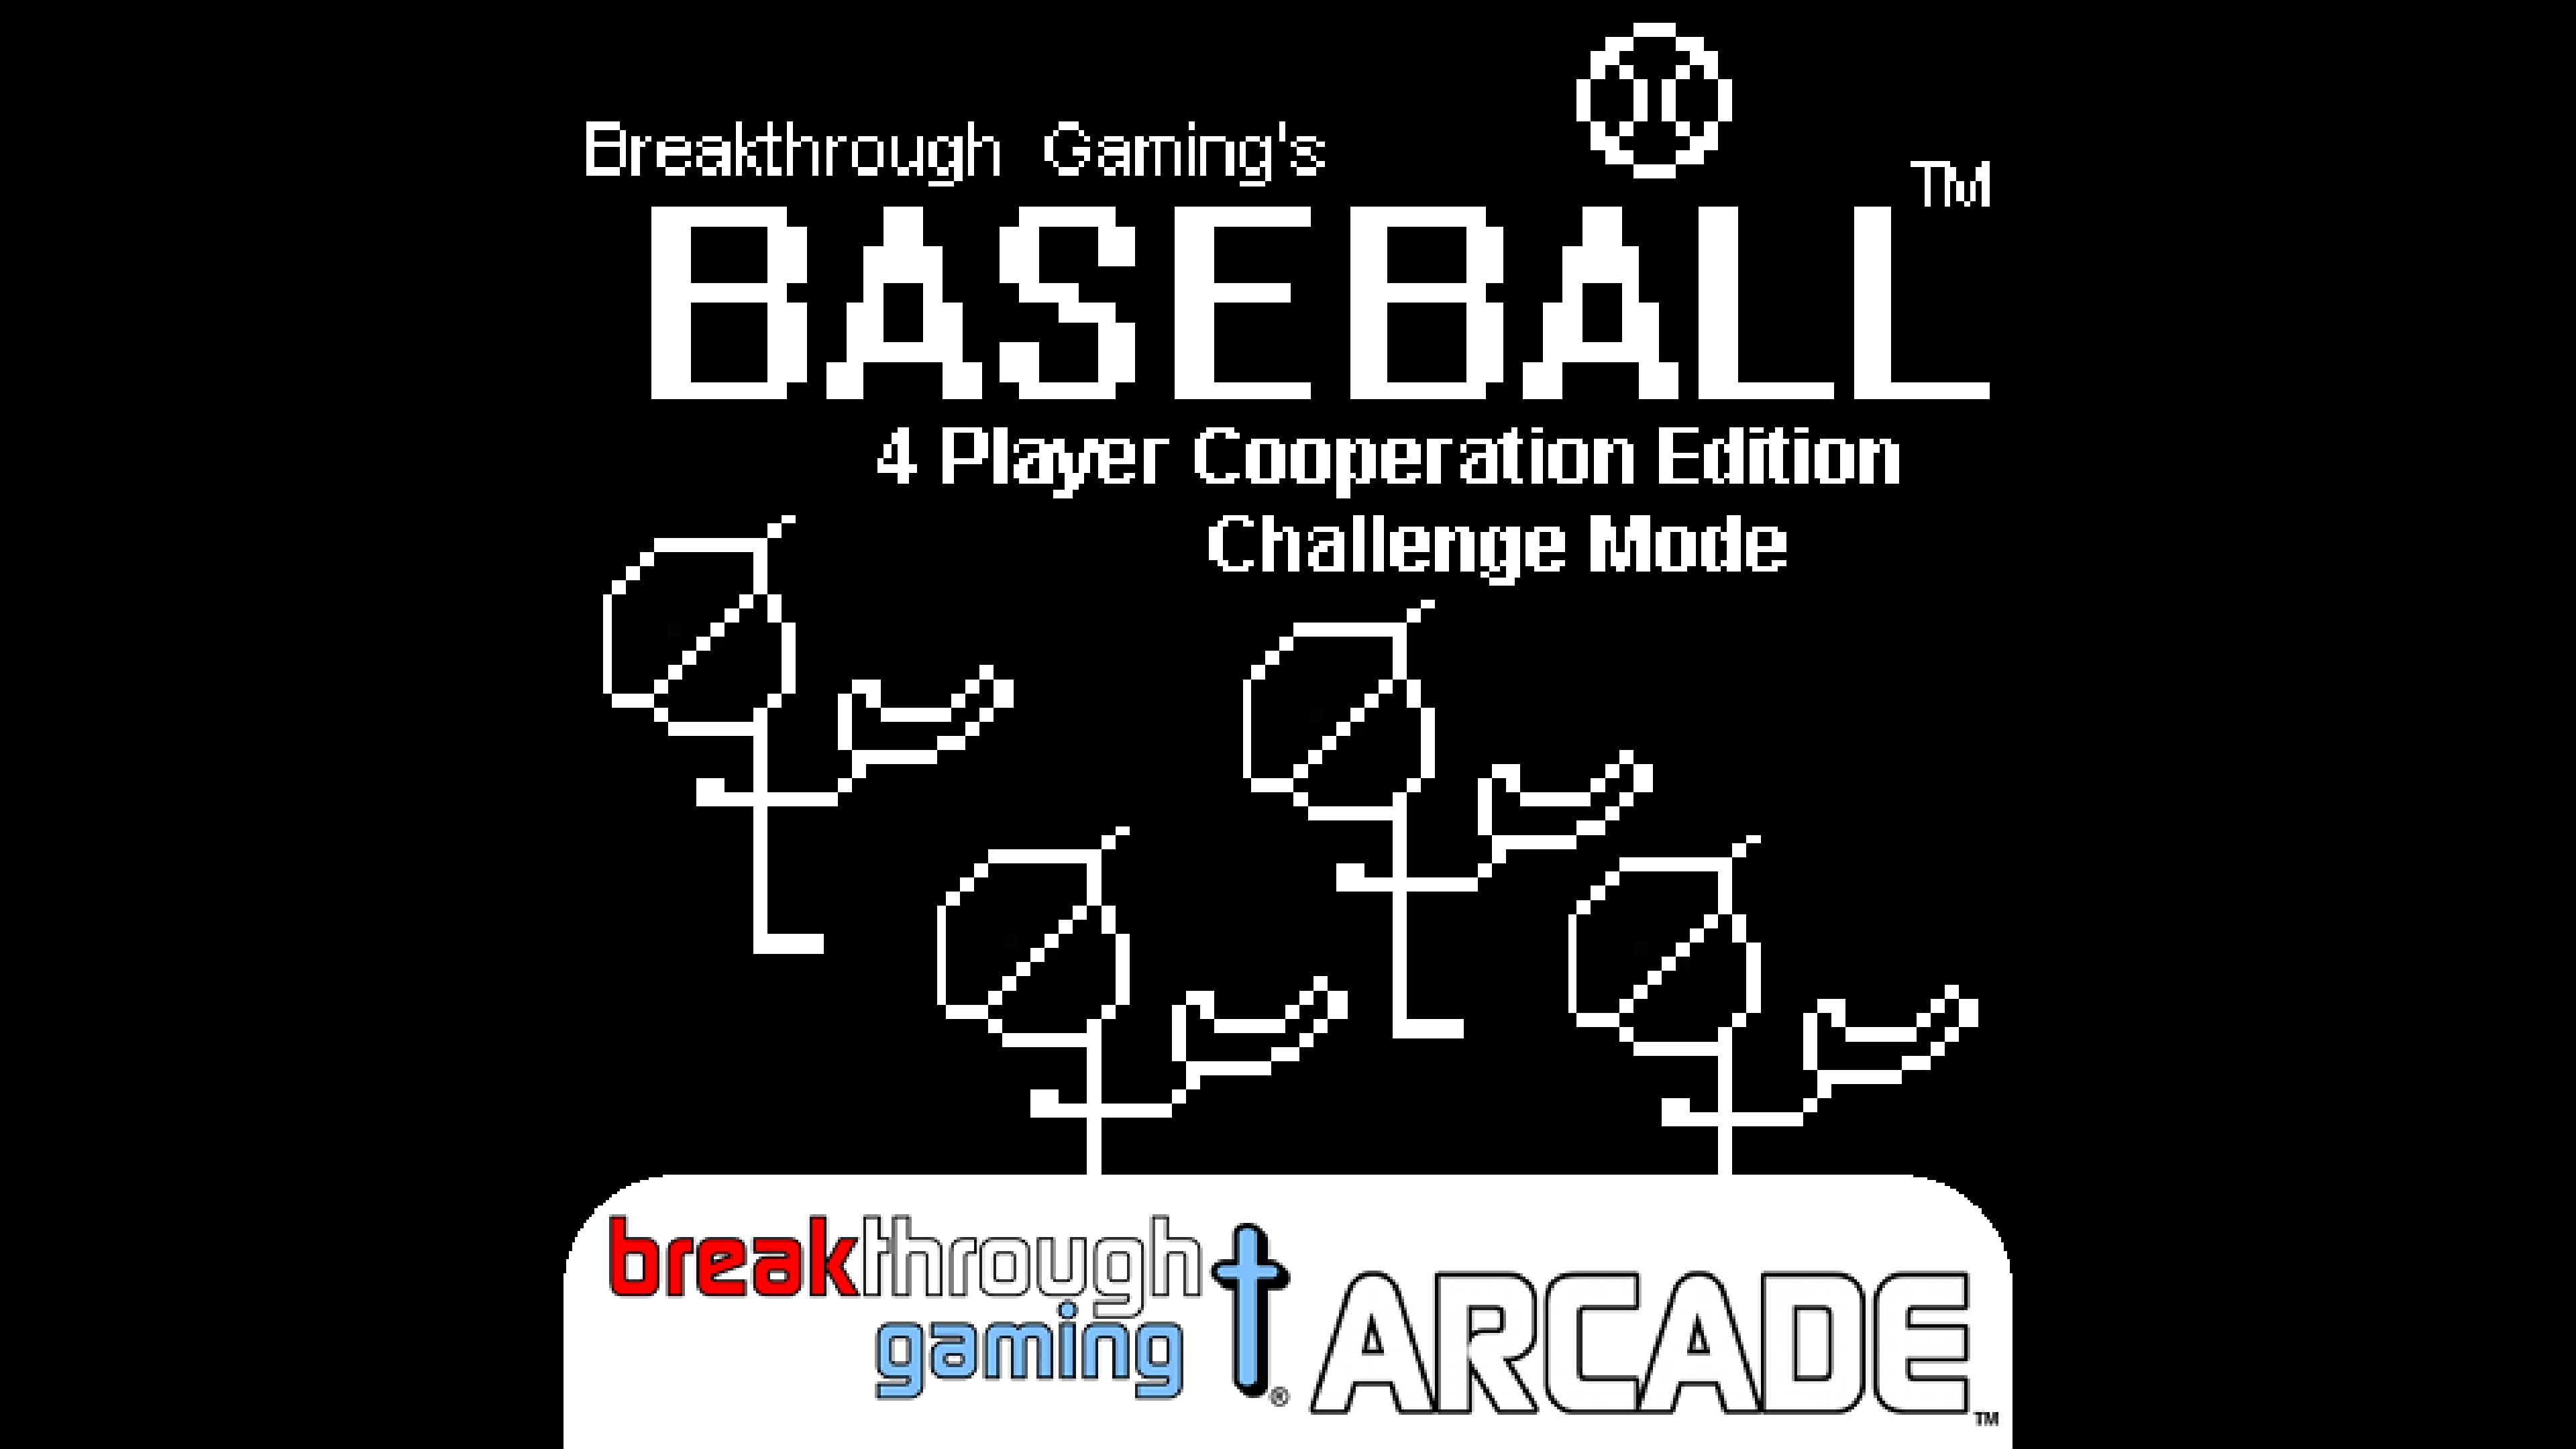 Baseball (4 Player Cooperation Edition) (Challenge Mode) - Breakthrough Gaming Arcade